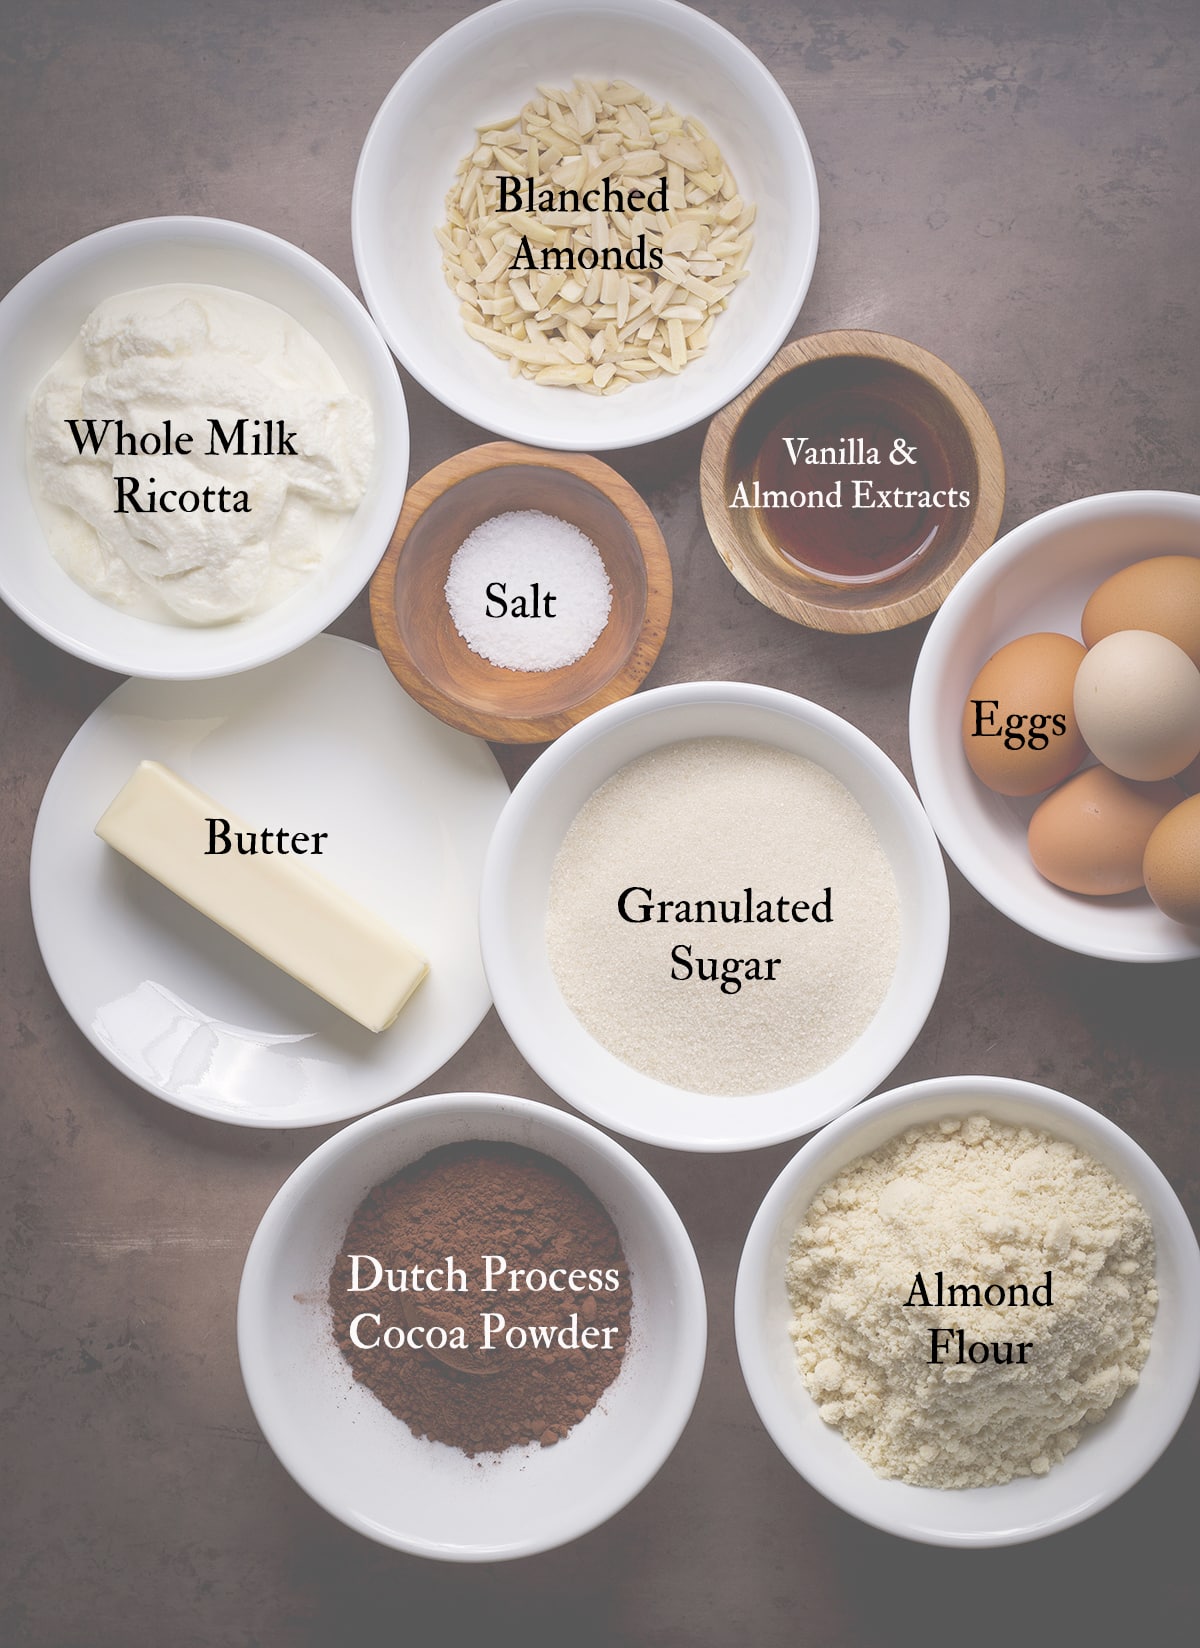 All the ingredients needed to bake a flourless chocolate ricotta cake with almond flour.